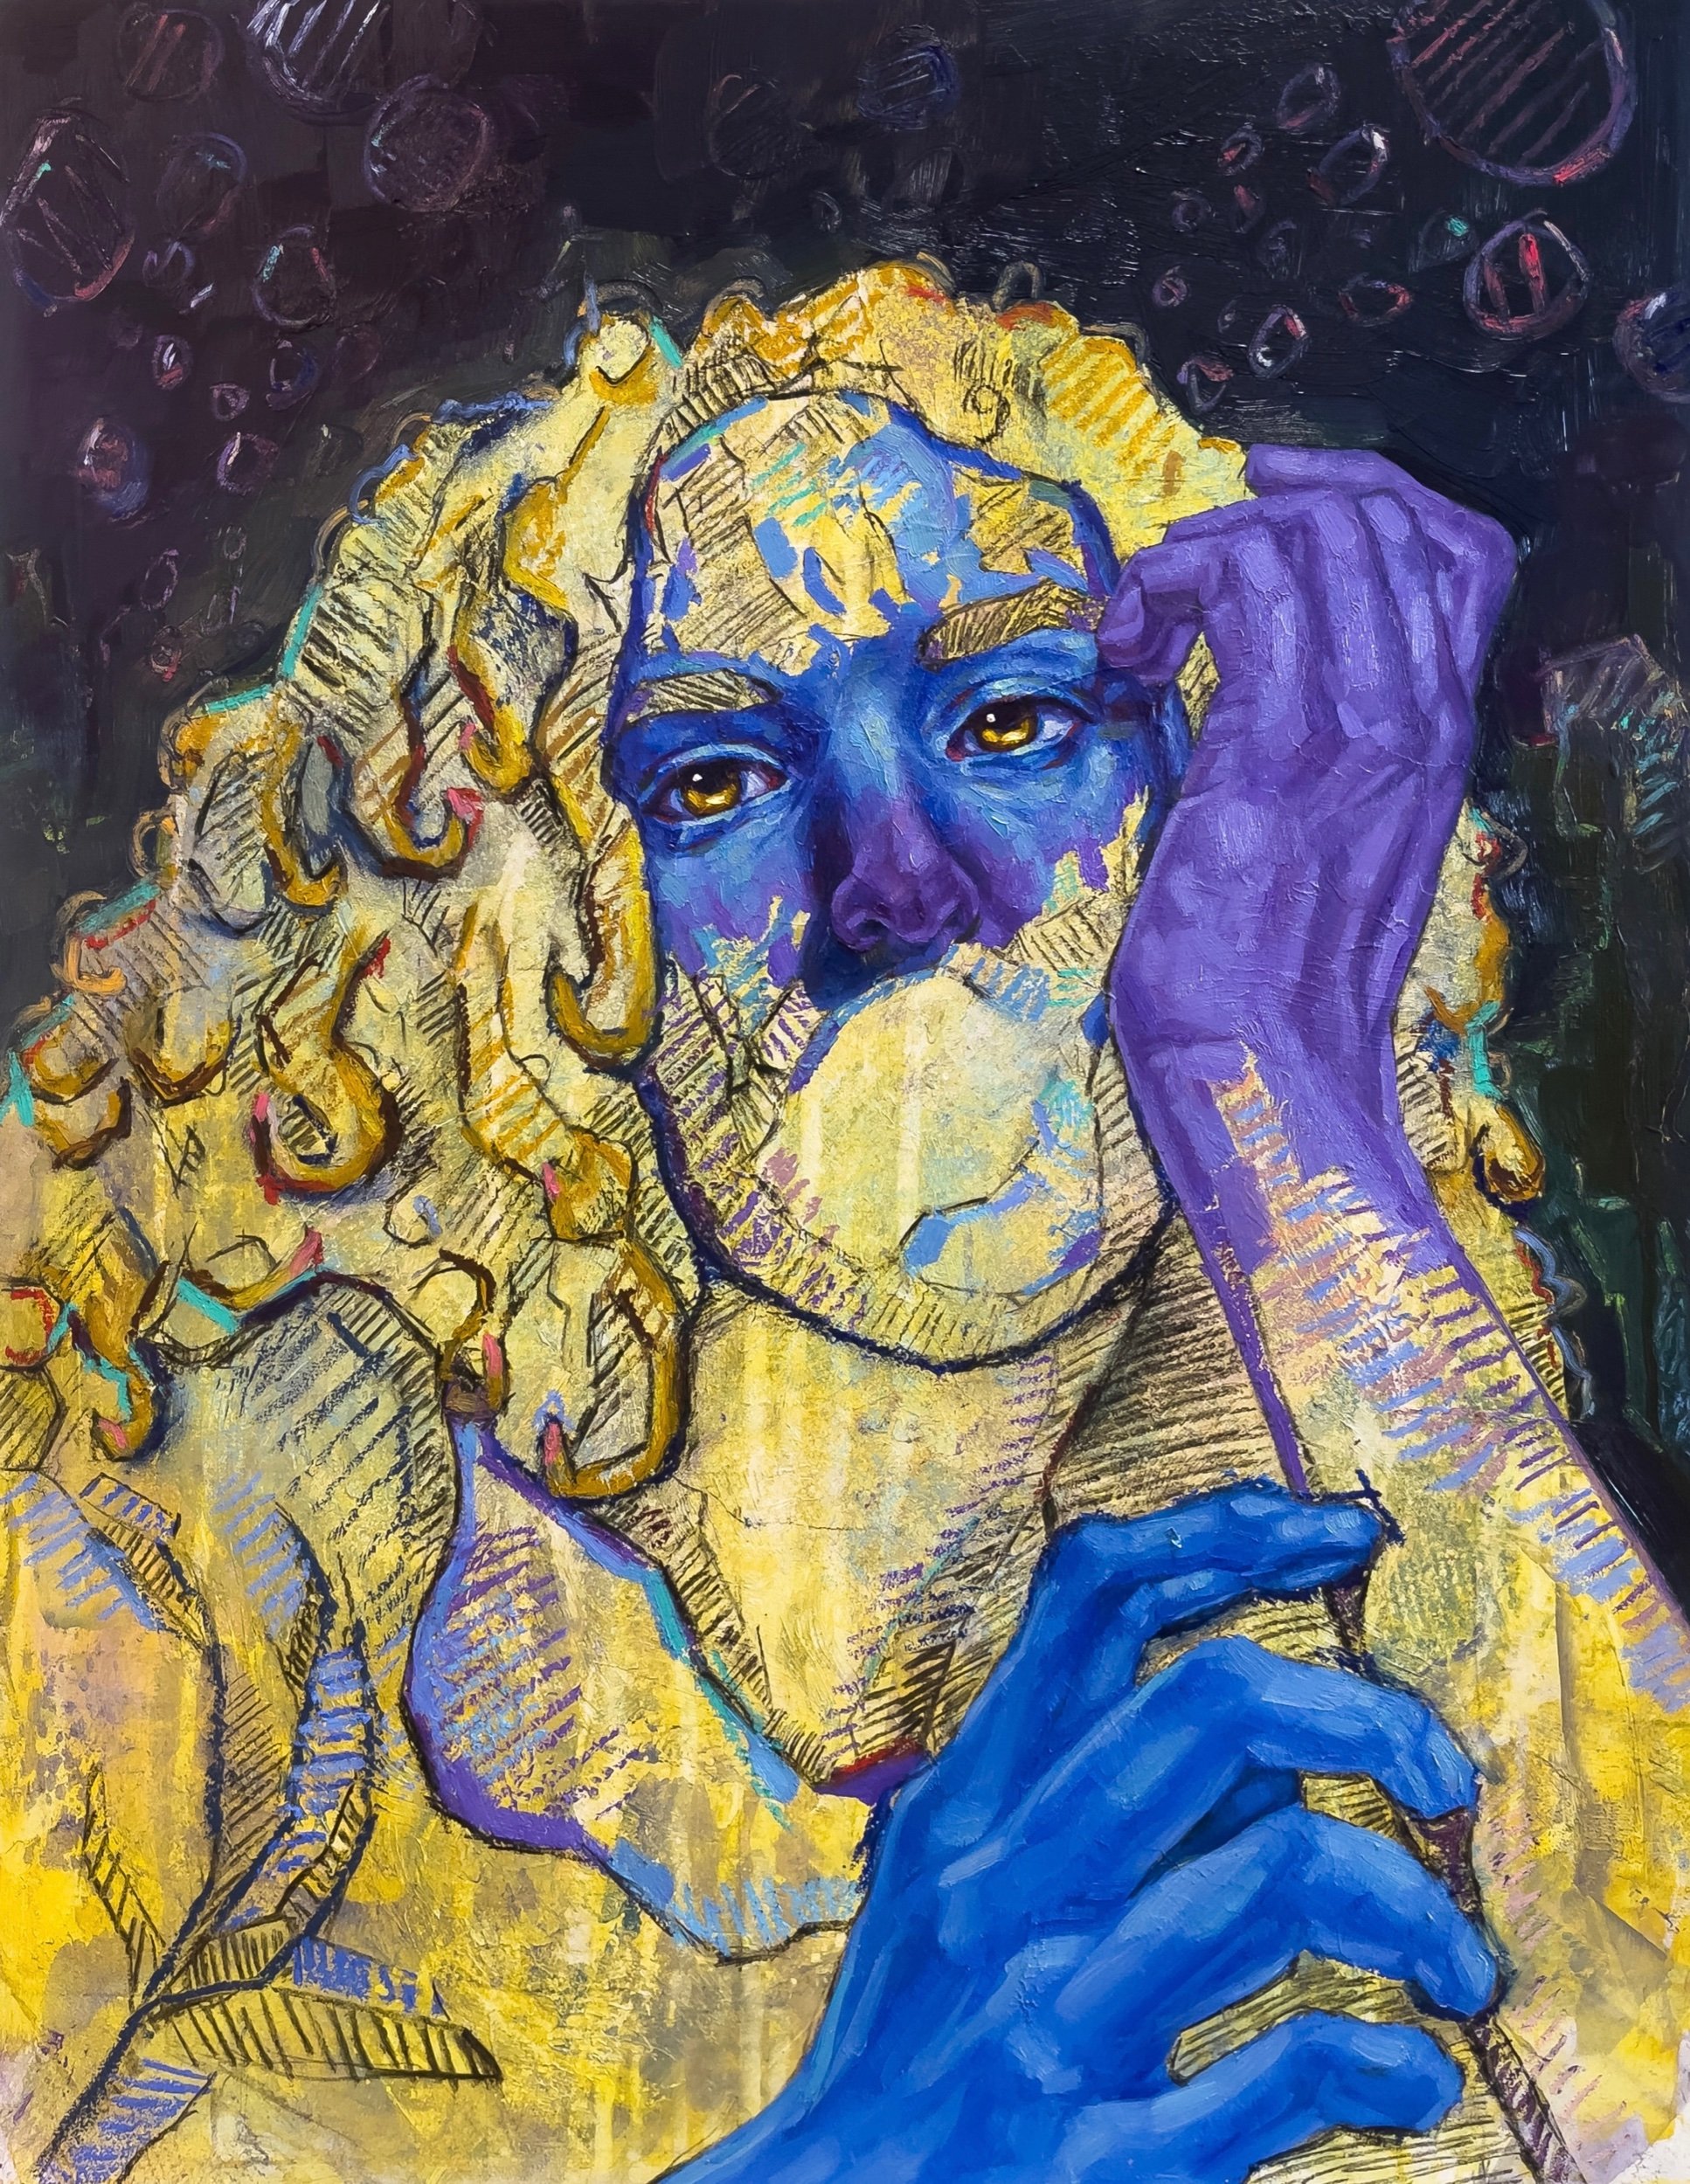 The Girl With The Golden Curls